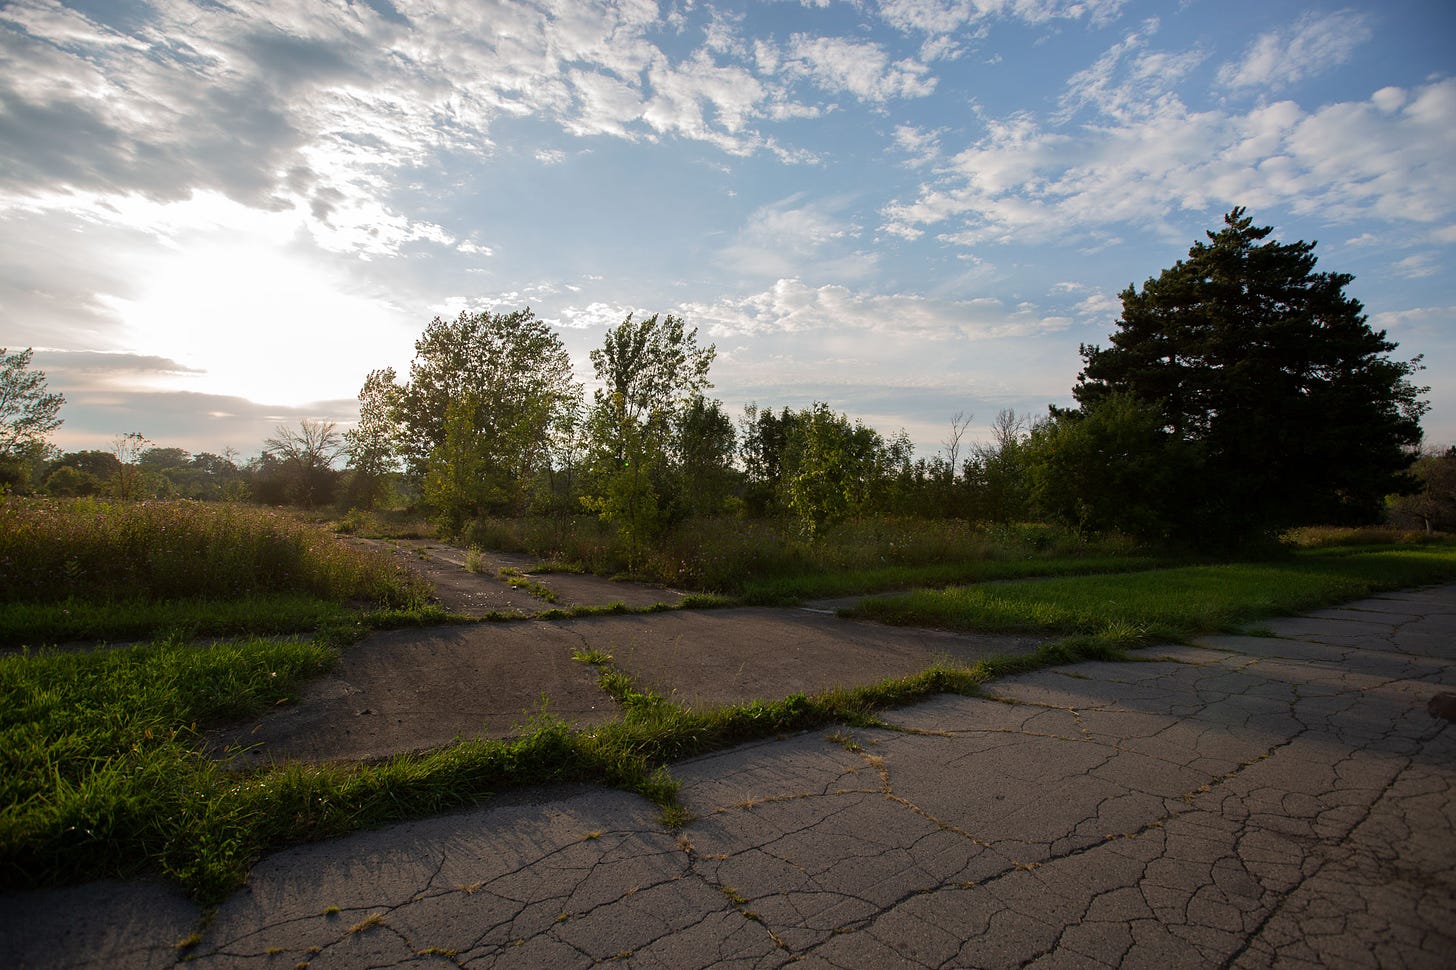 The Love Canal neighborhood as it looked in September 2023. Photo by Eric F. Coppolino / Chiron Return